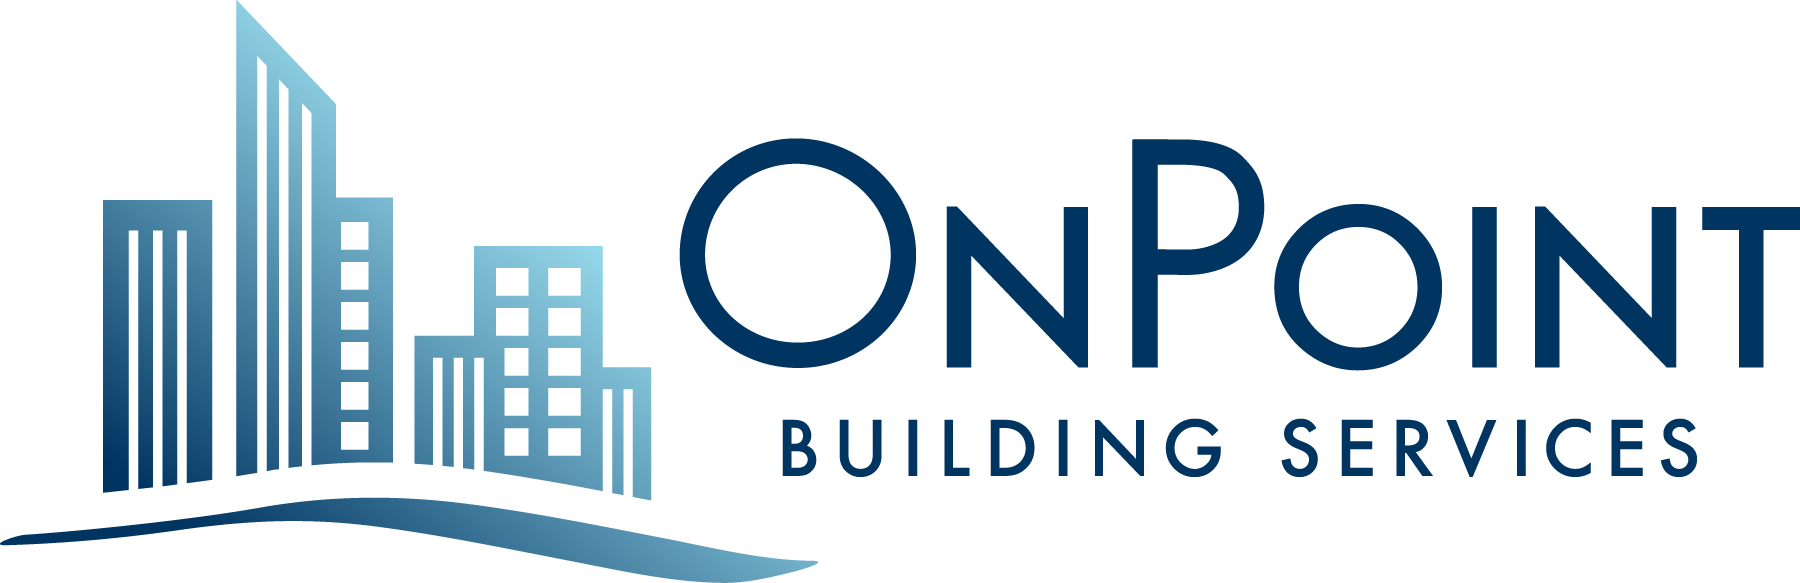 OnPoint Building Services logo